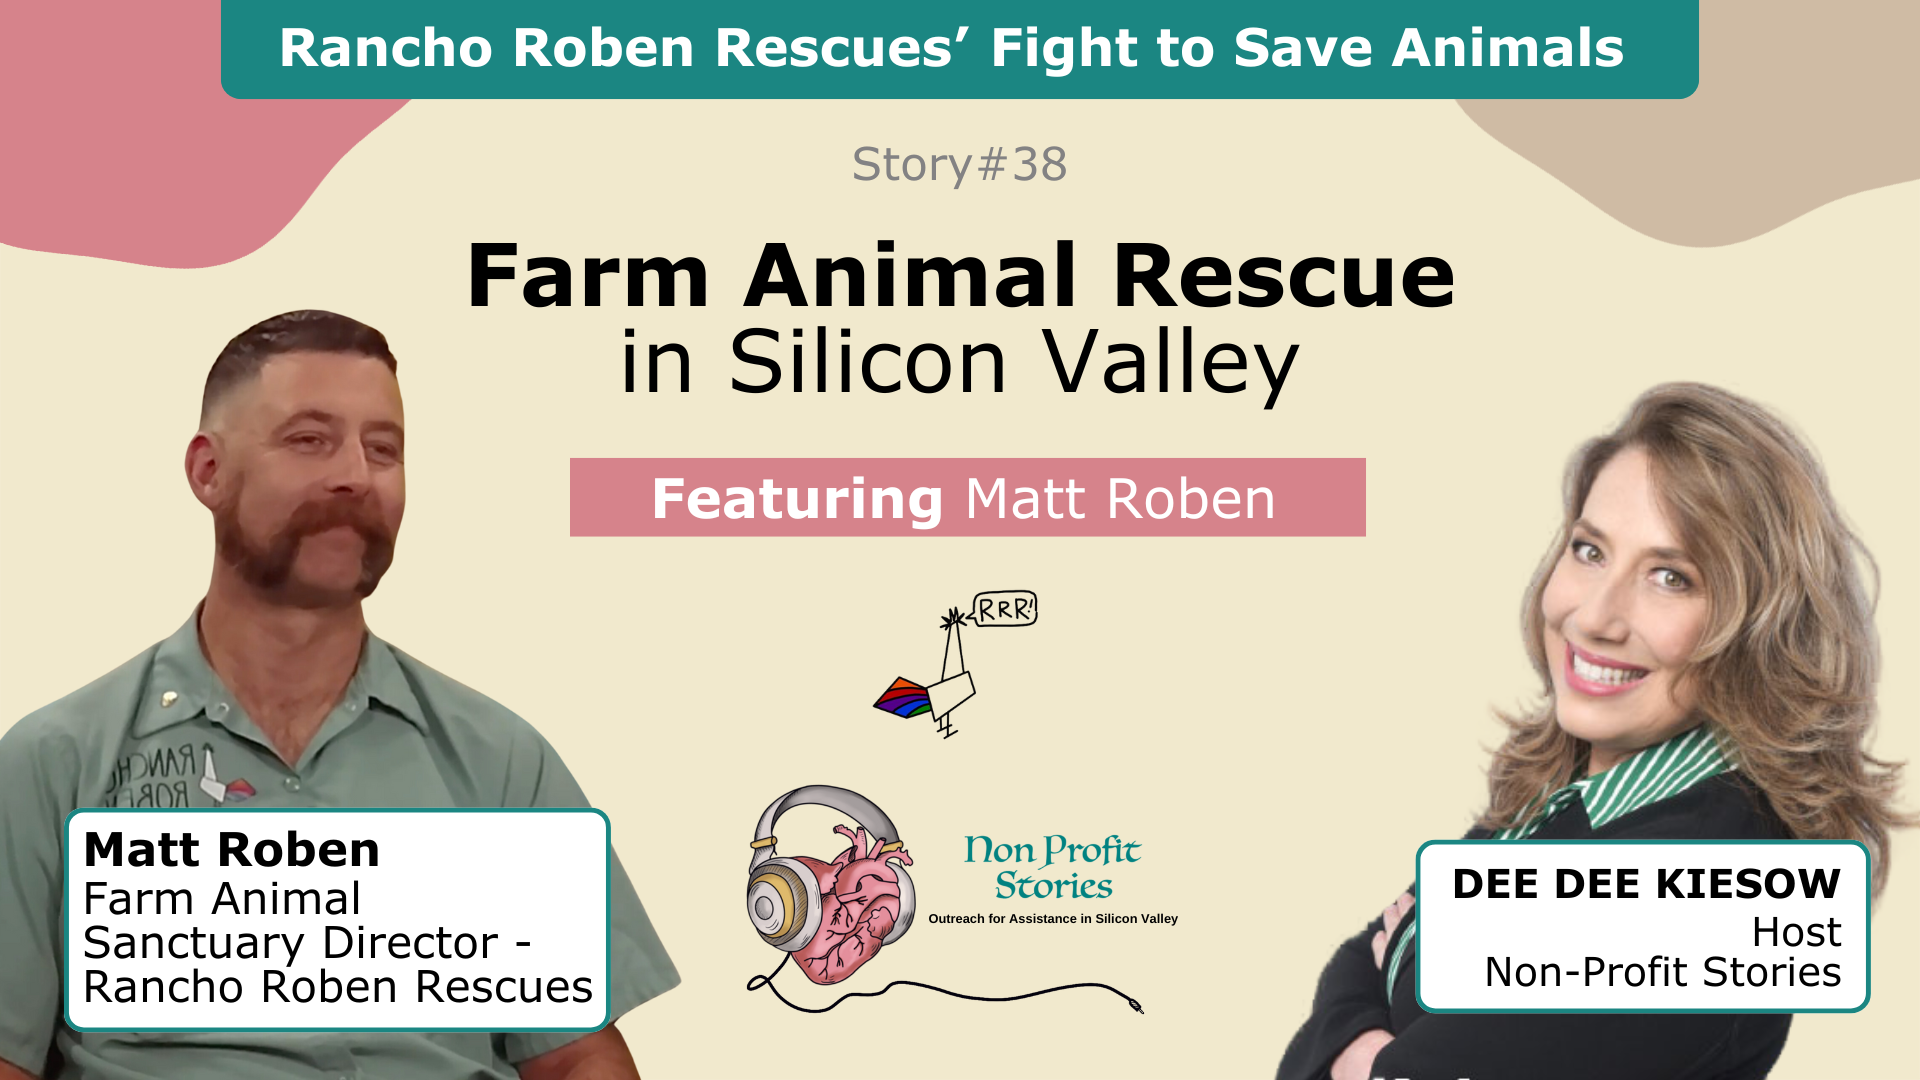 Farm Animal Rescue: Rancho Roben Rescues’ Fight to Save Animals in Silicon Valley